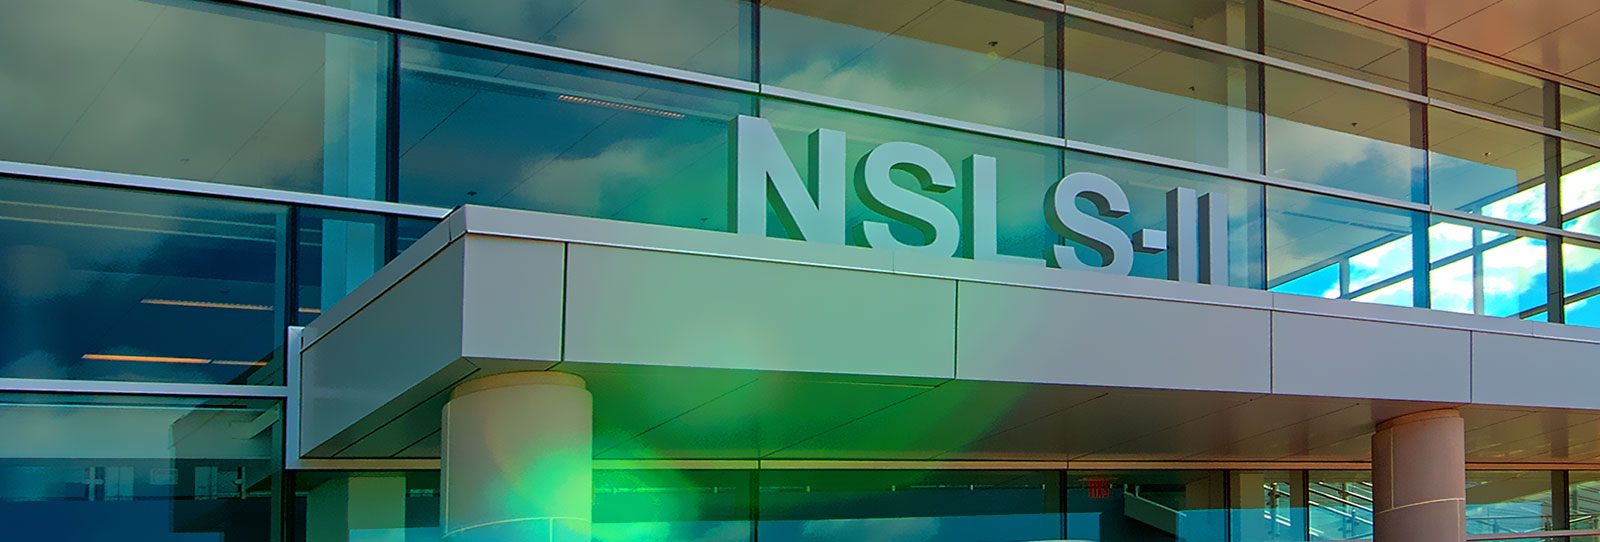 photo of the entryway to NSLS-II